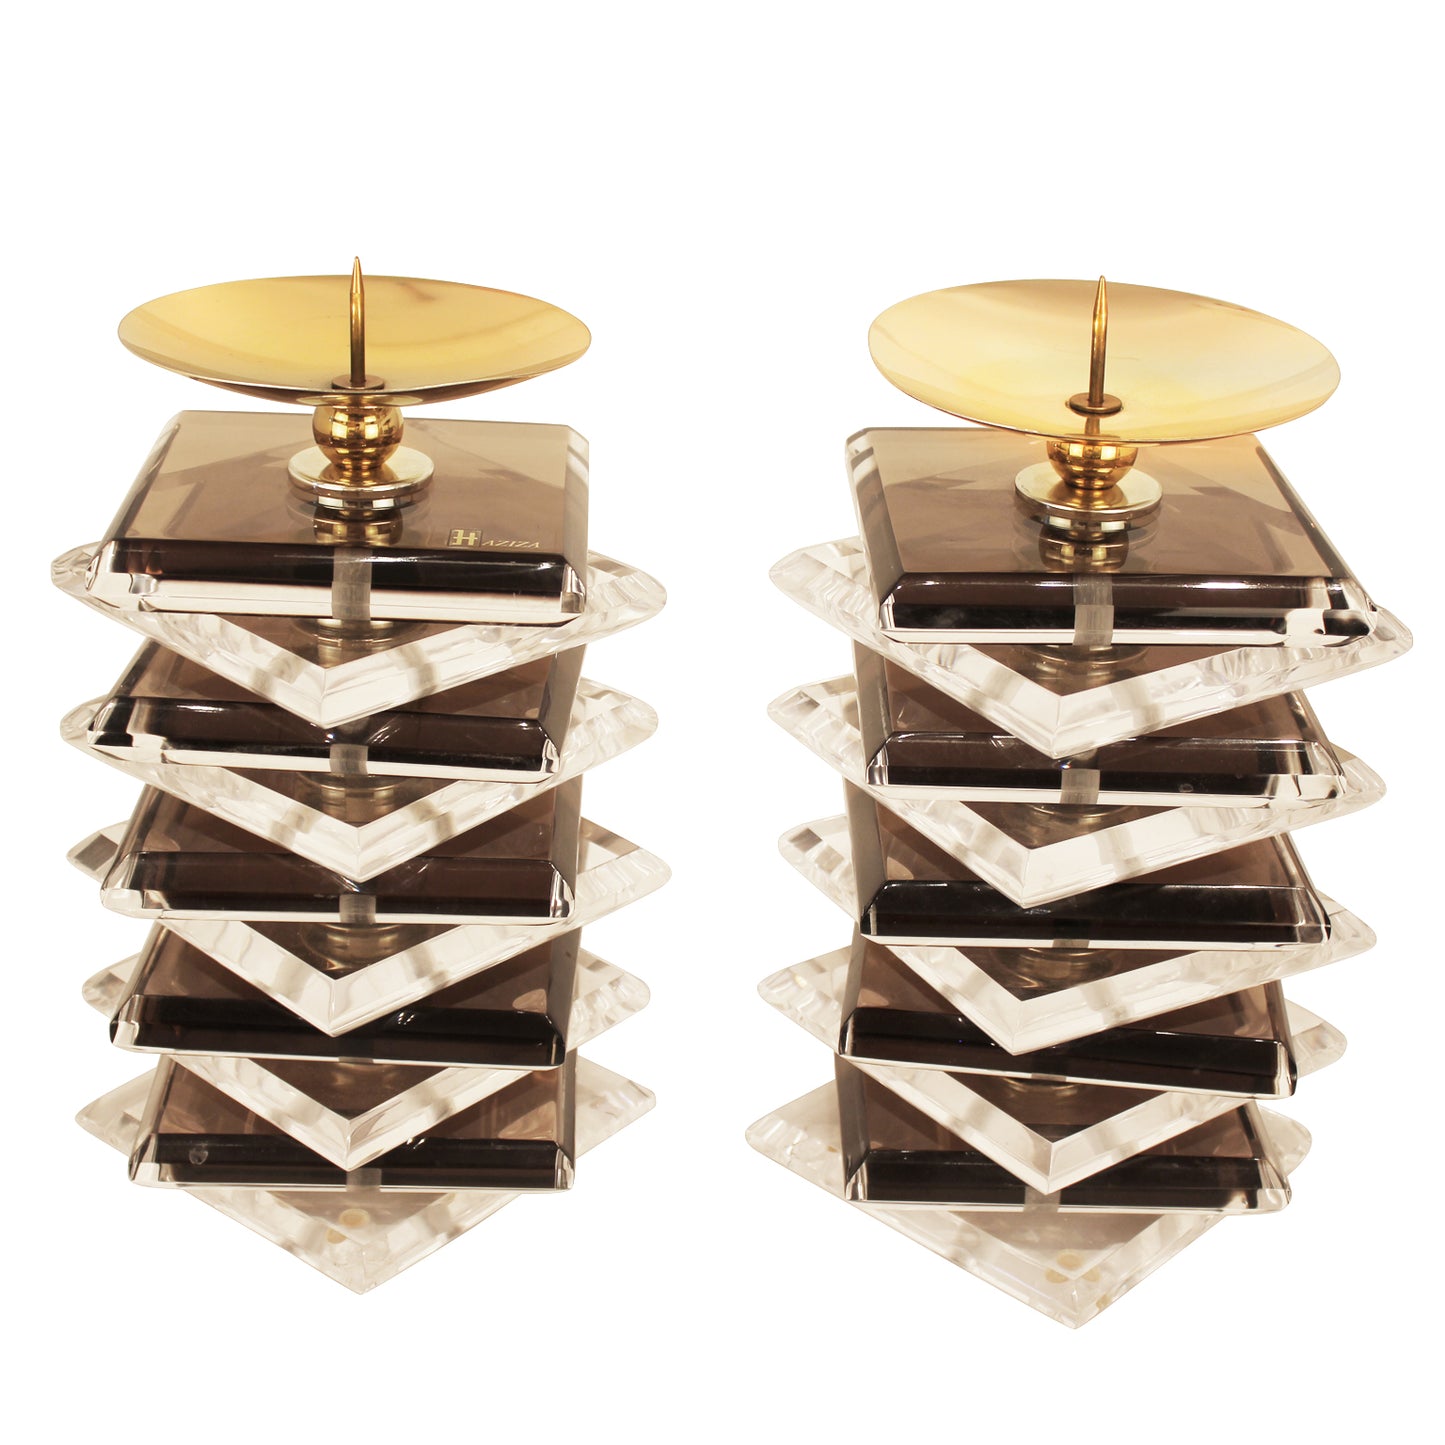 Magnificent Accent Candle Holders by Haziza